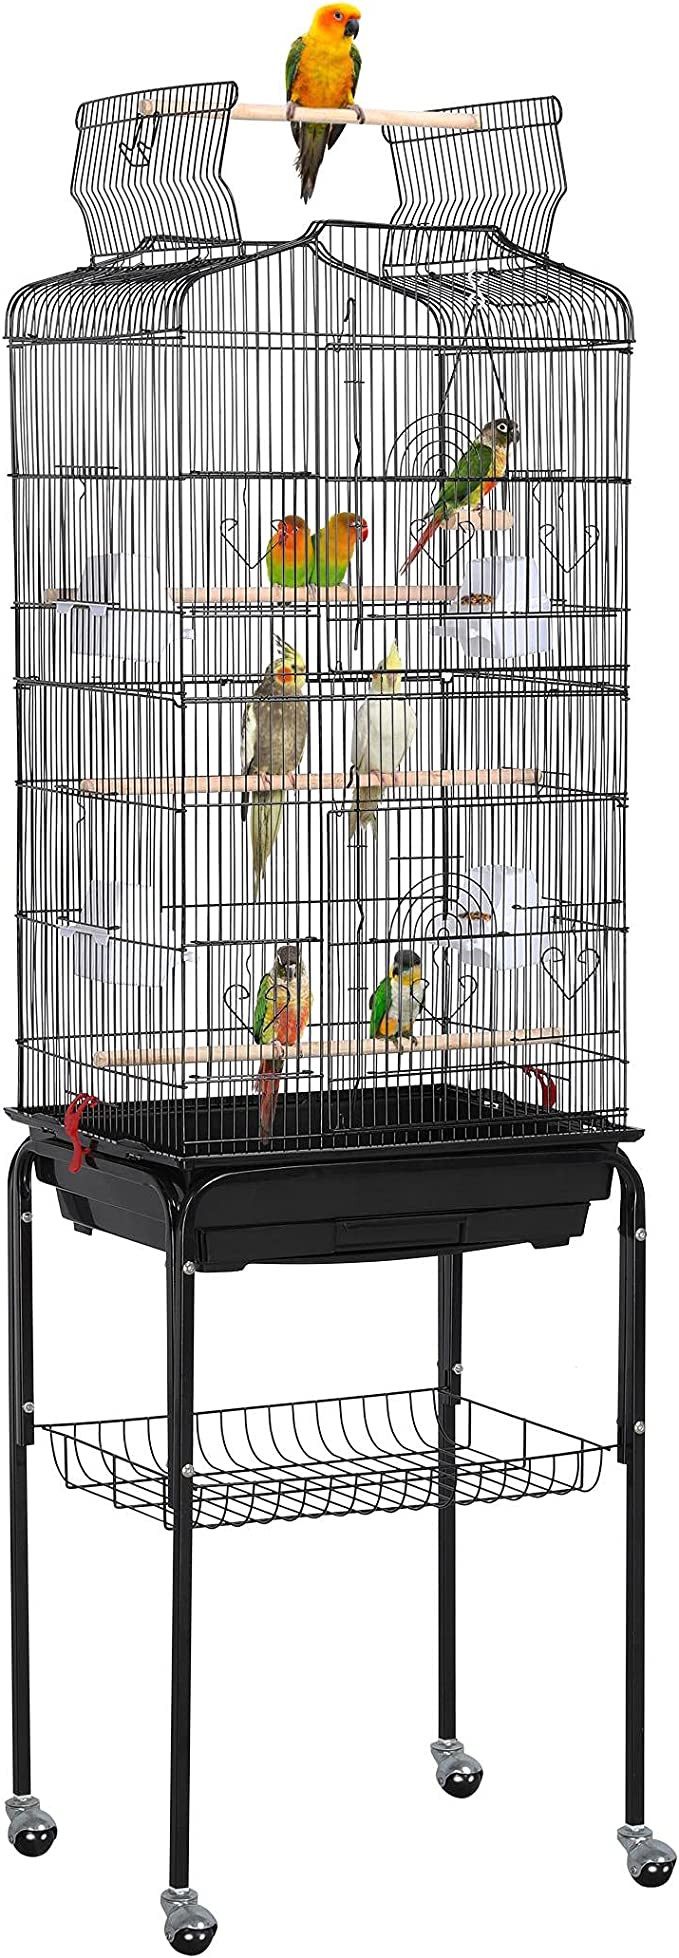 Yaheetech 64-inch Play Open Top - Bird Cages for Parakeets